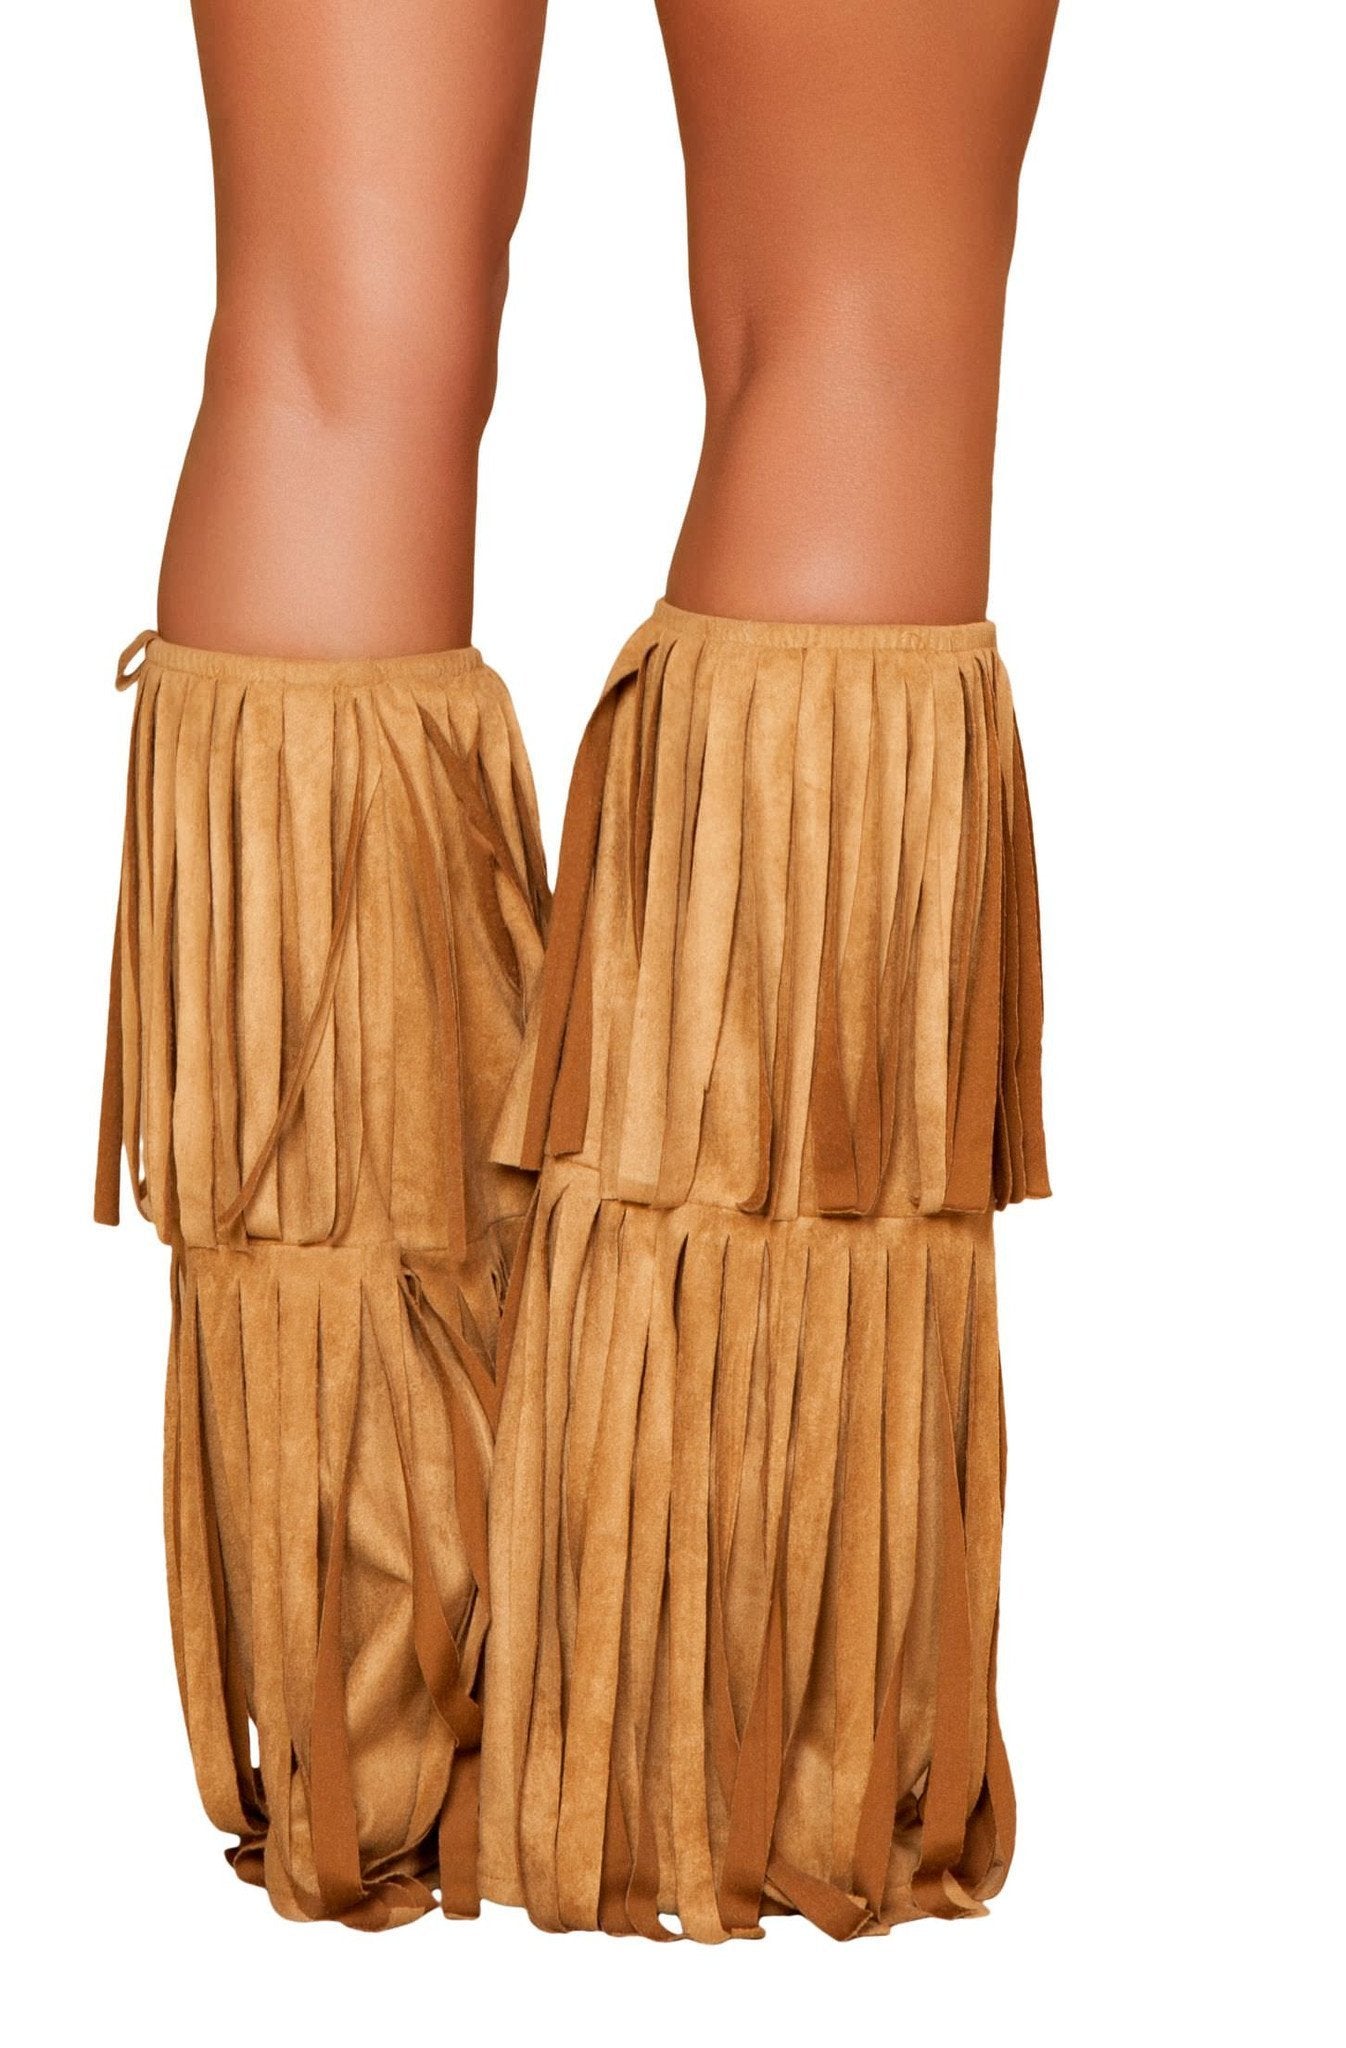 Buy Pair of Suede Fringed Leg Warmers from RomaRetailShop for  with Same Day Shipping Designed by Roma Costume